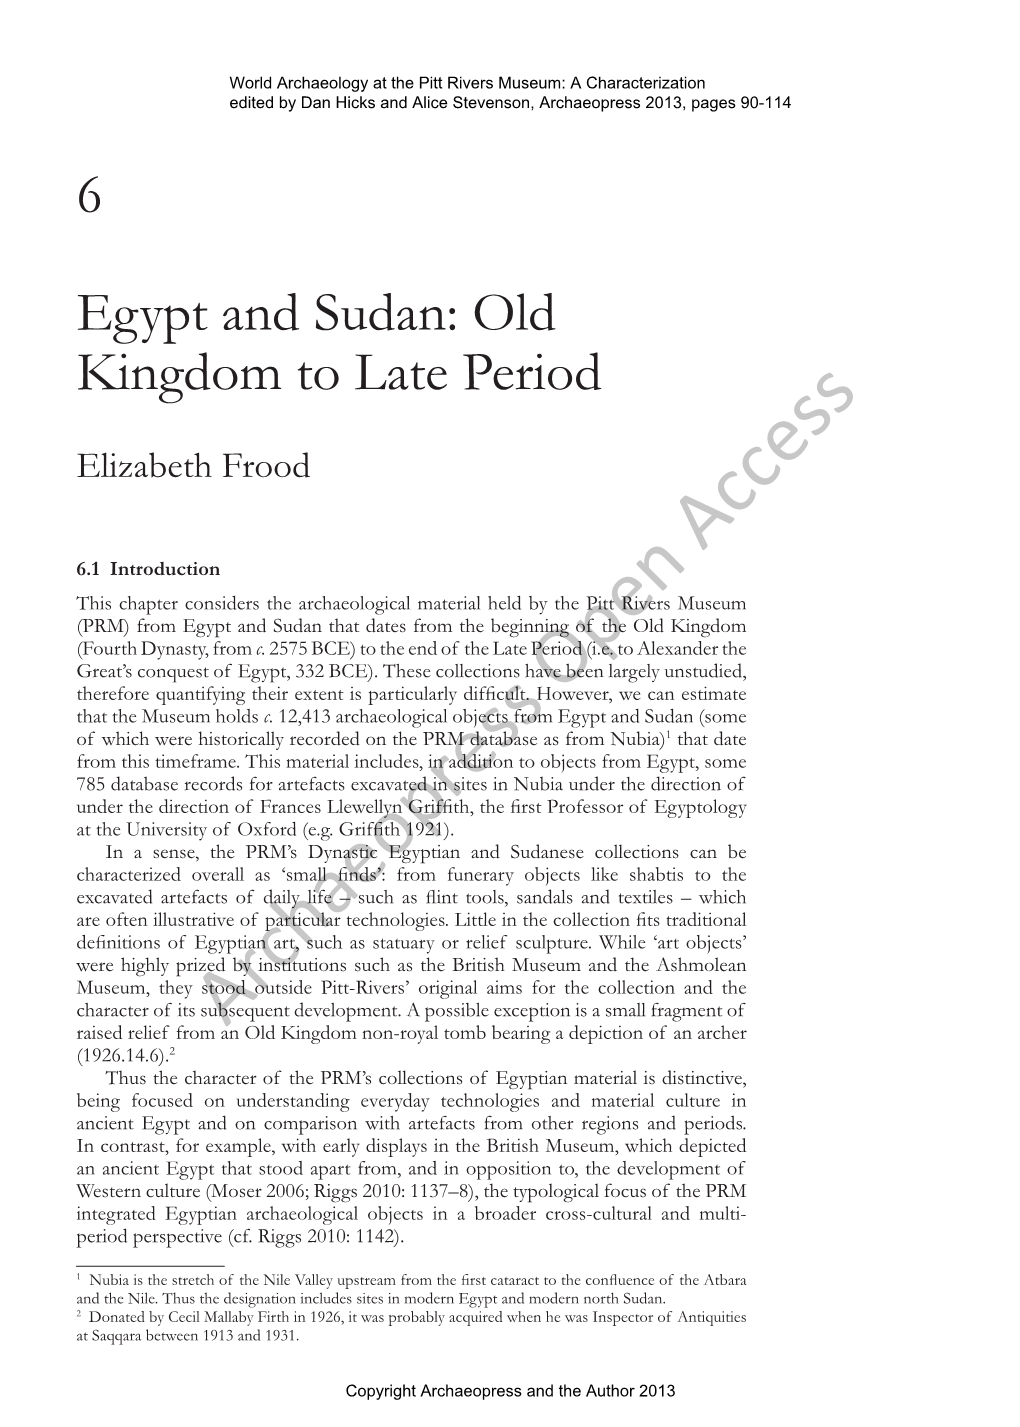 Egypt and Sudan: Old Kingdom to Late Period